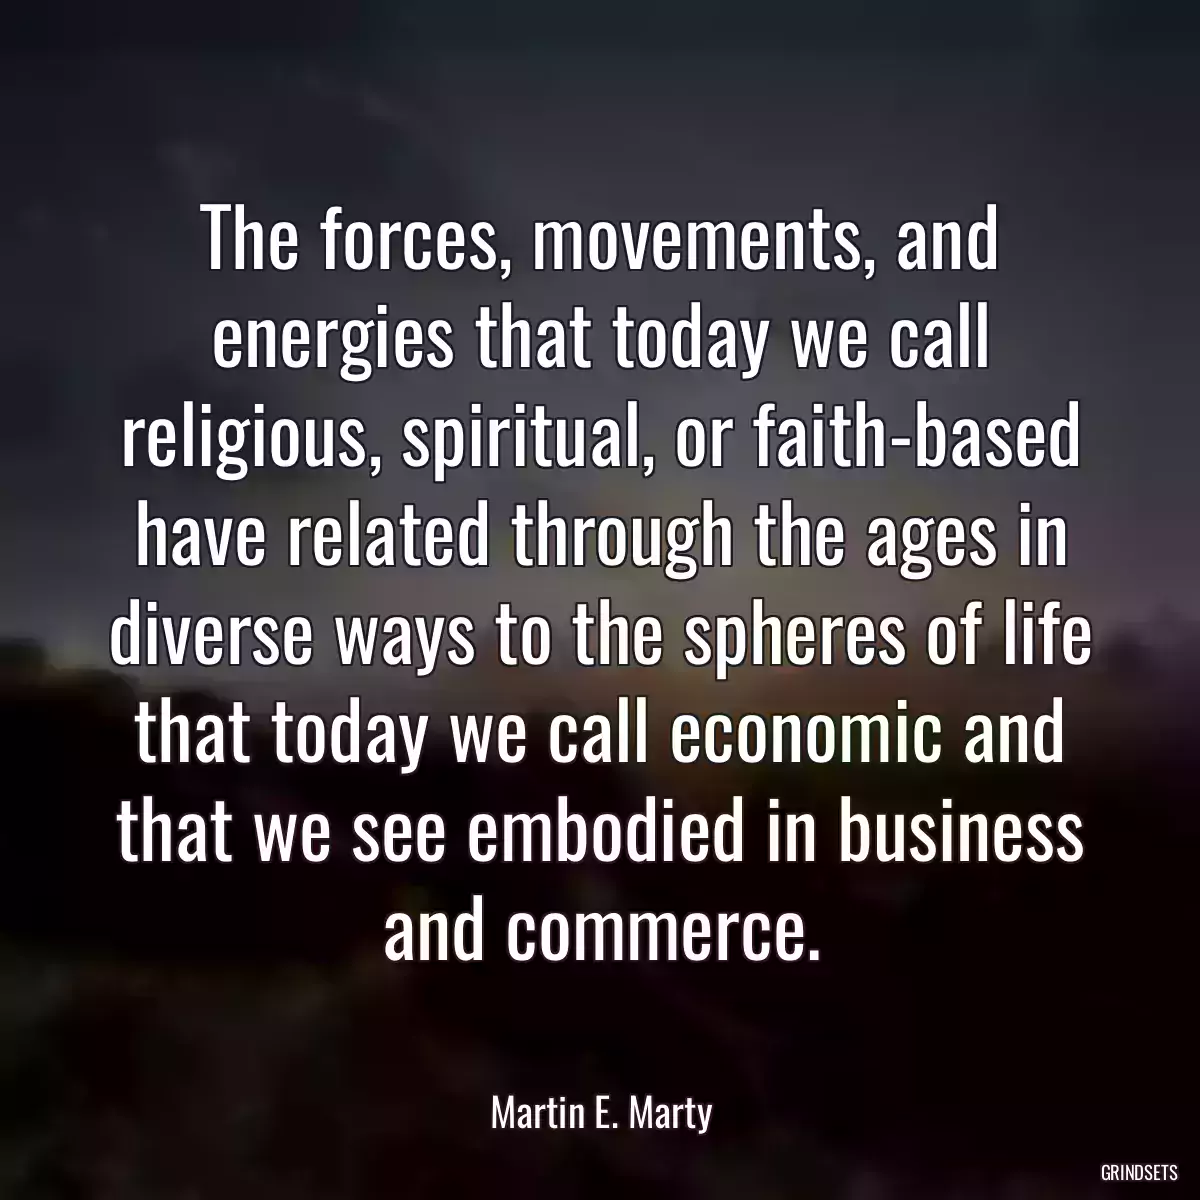 The forces, movements, and energies that today we call religious, spiritual, or faith-based have related through the ages in diverse ways to the spheres of life that today we call economic and that we see embodied in business and commerce.